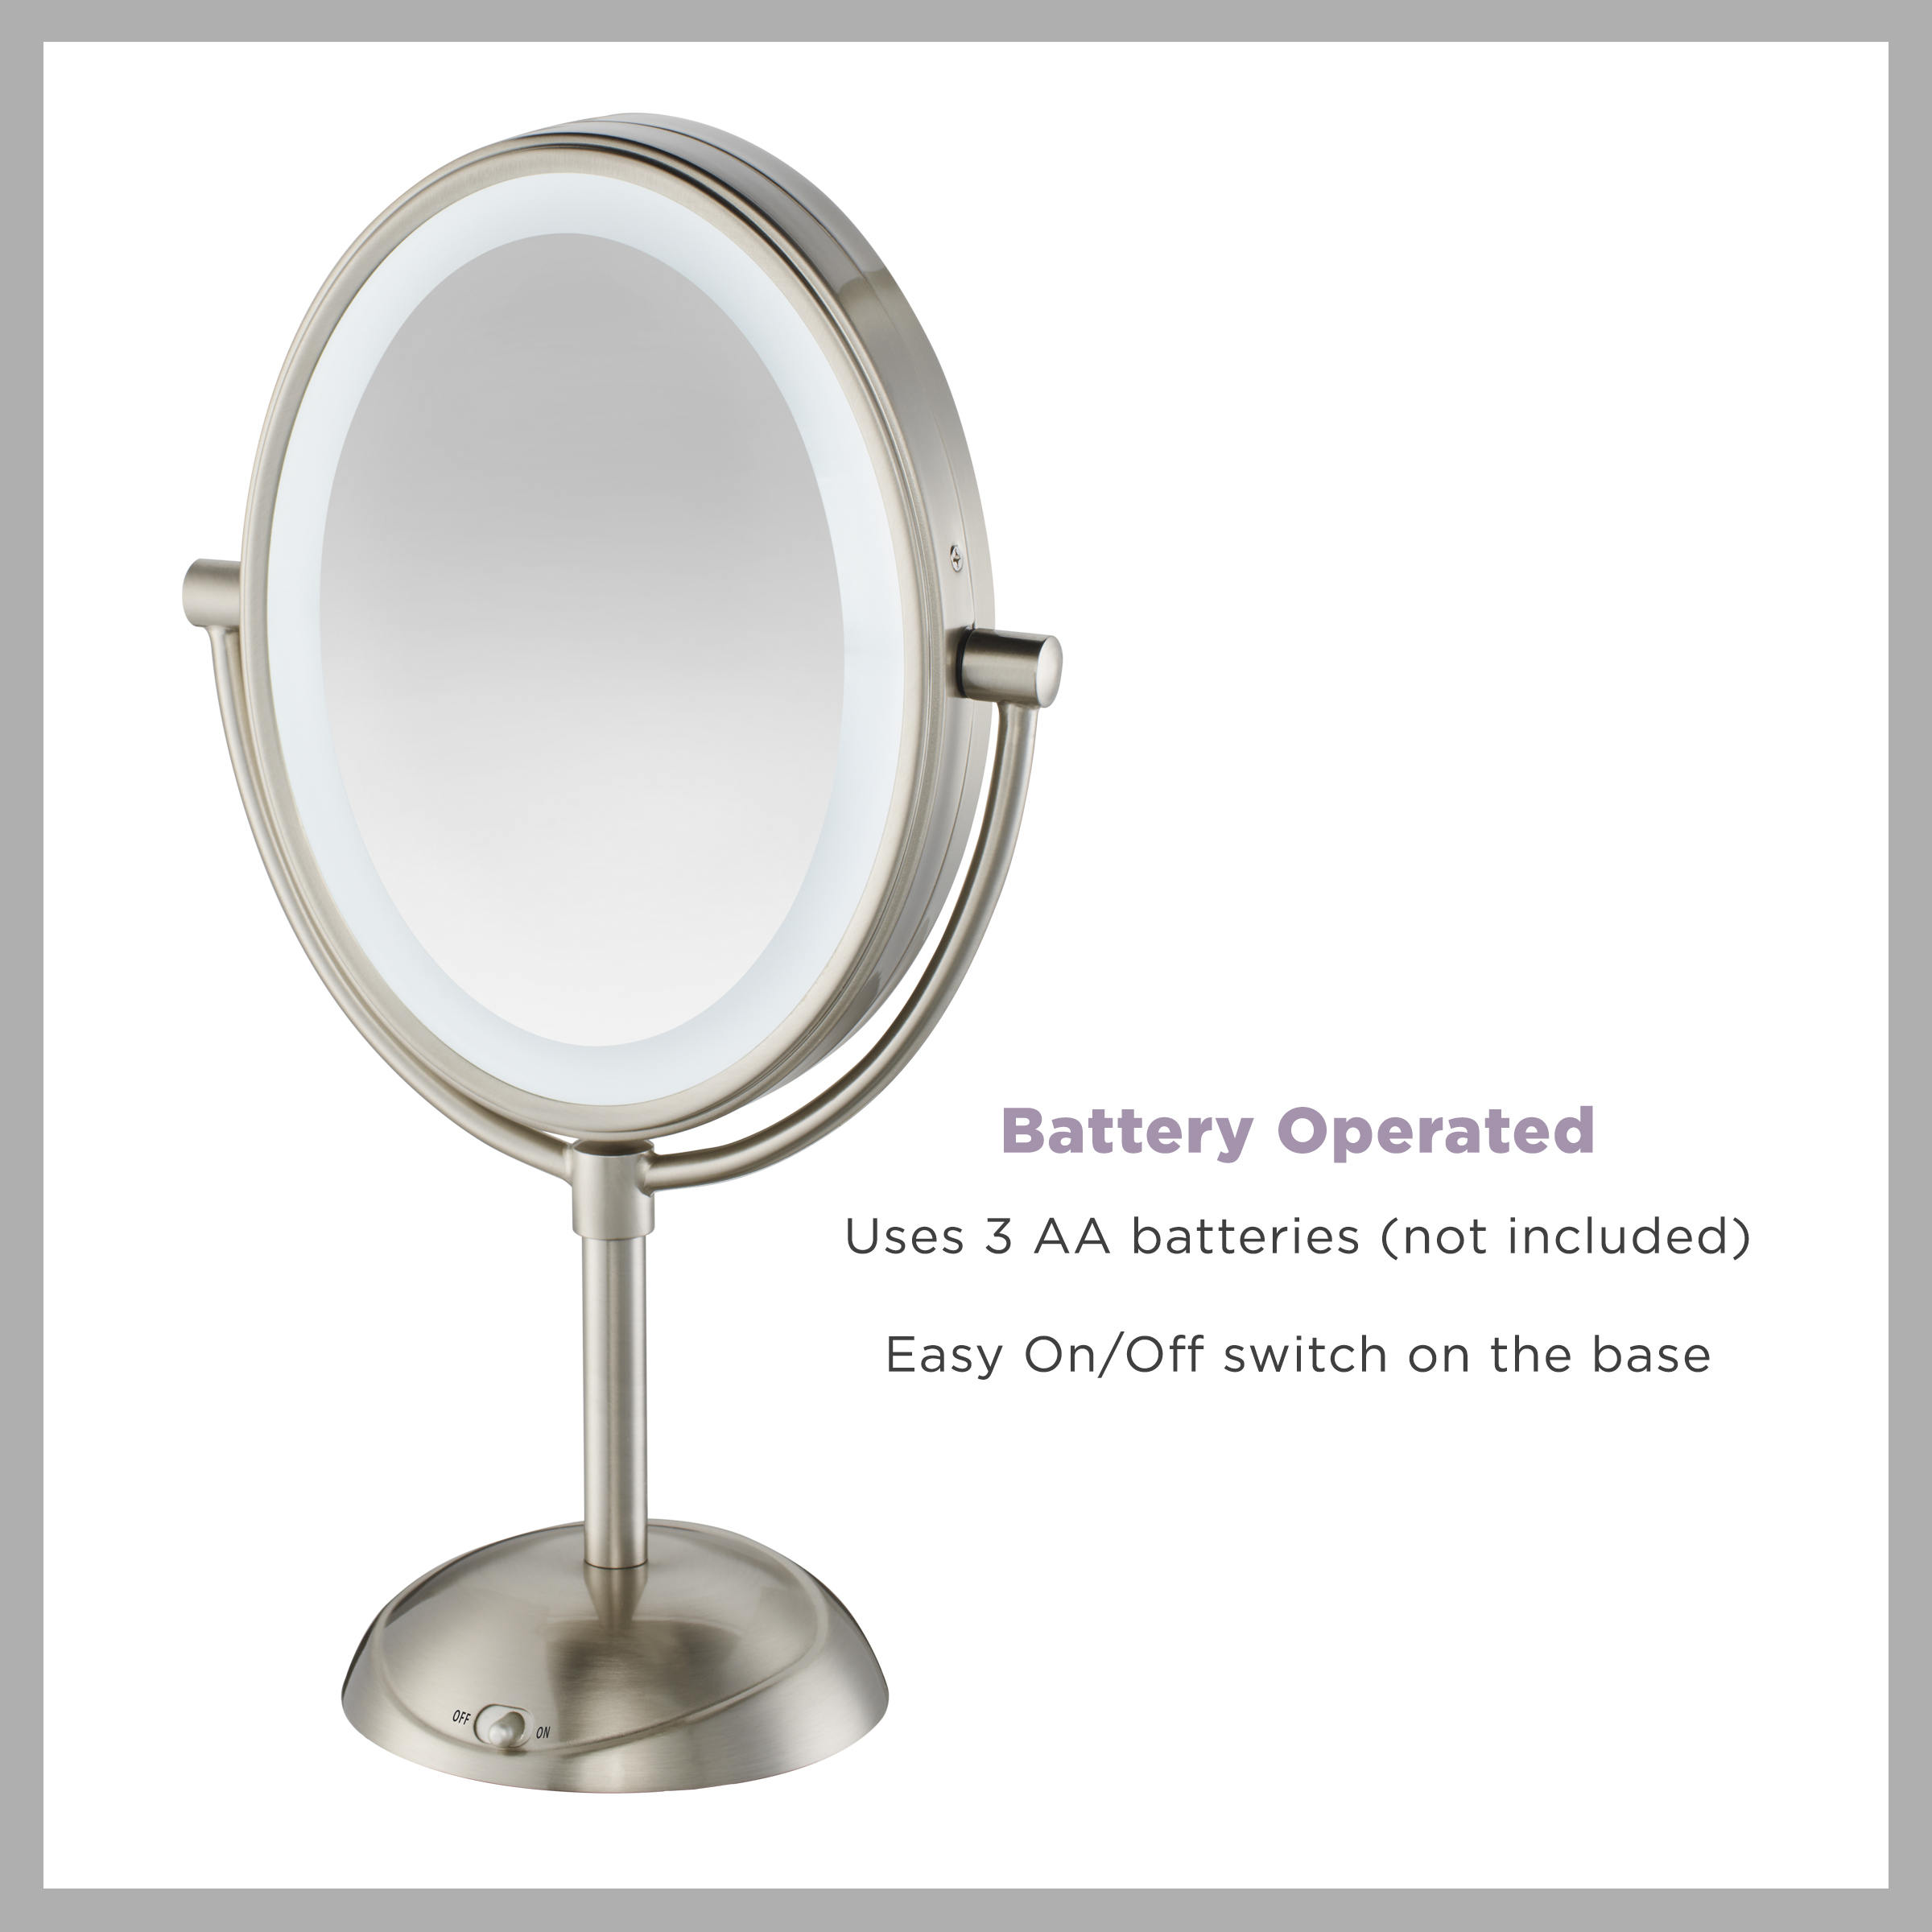 Conair Double-Sided Lighted Vanity Mirror with LED Lights, 1x/7x Magnification, Satin Nickel, BE157 - image 4 of 8